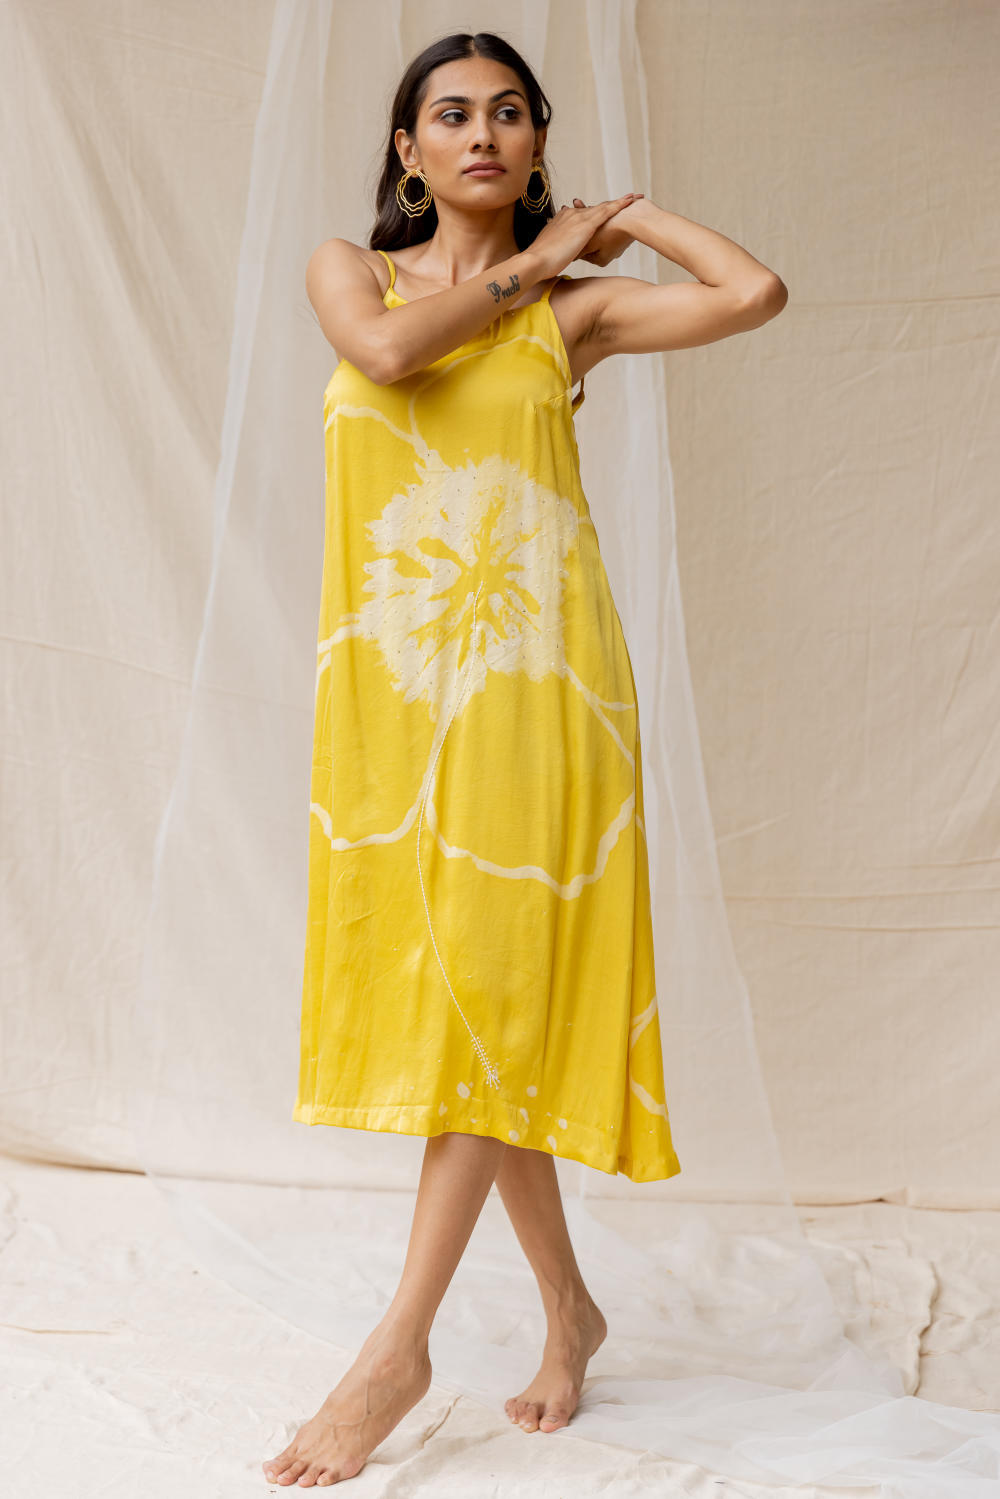 Hibiscus on a date dress - yellow